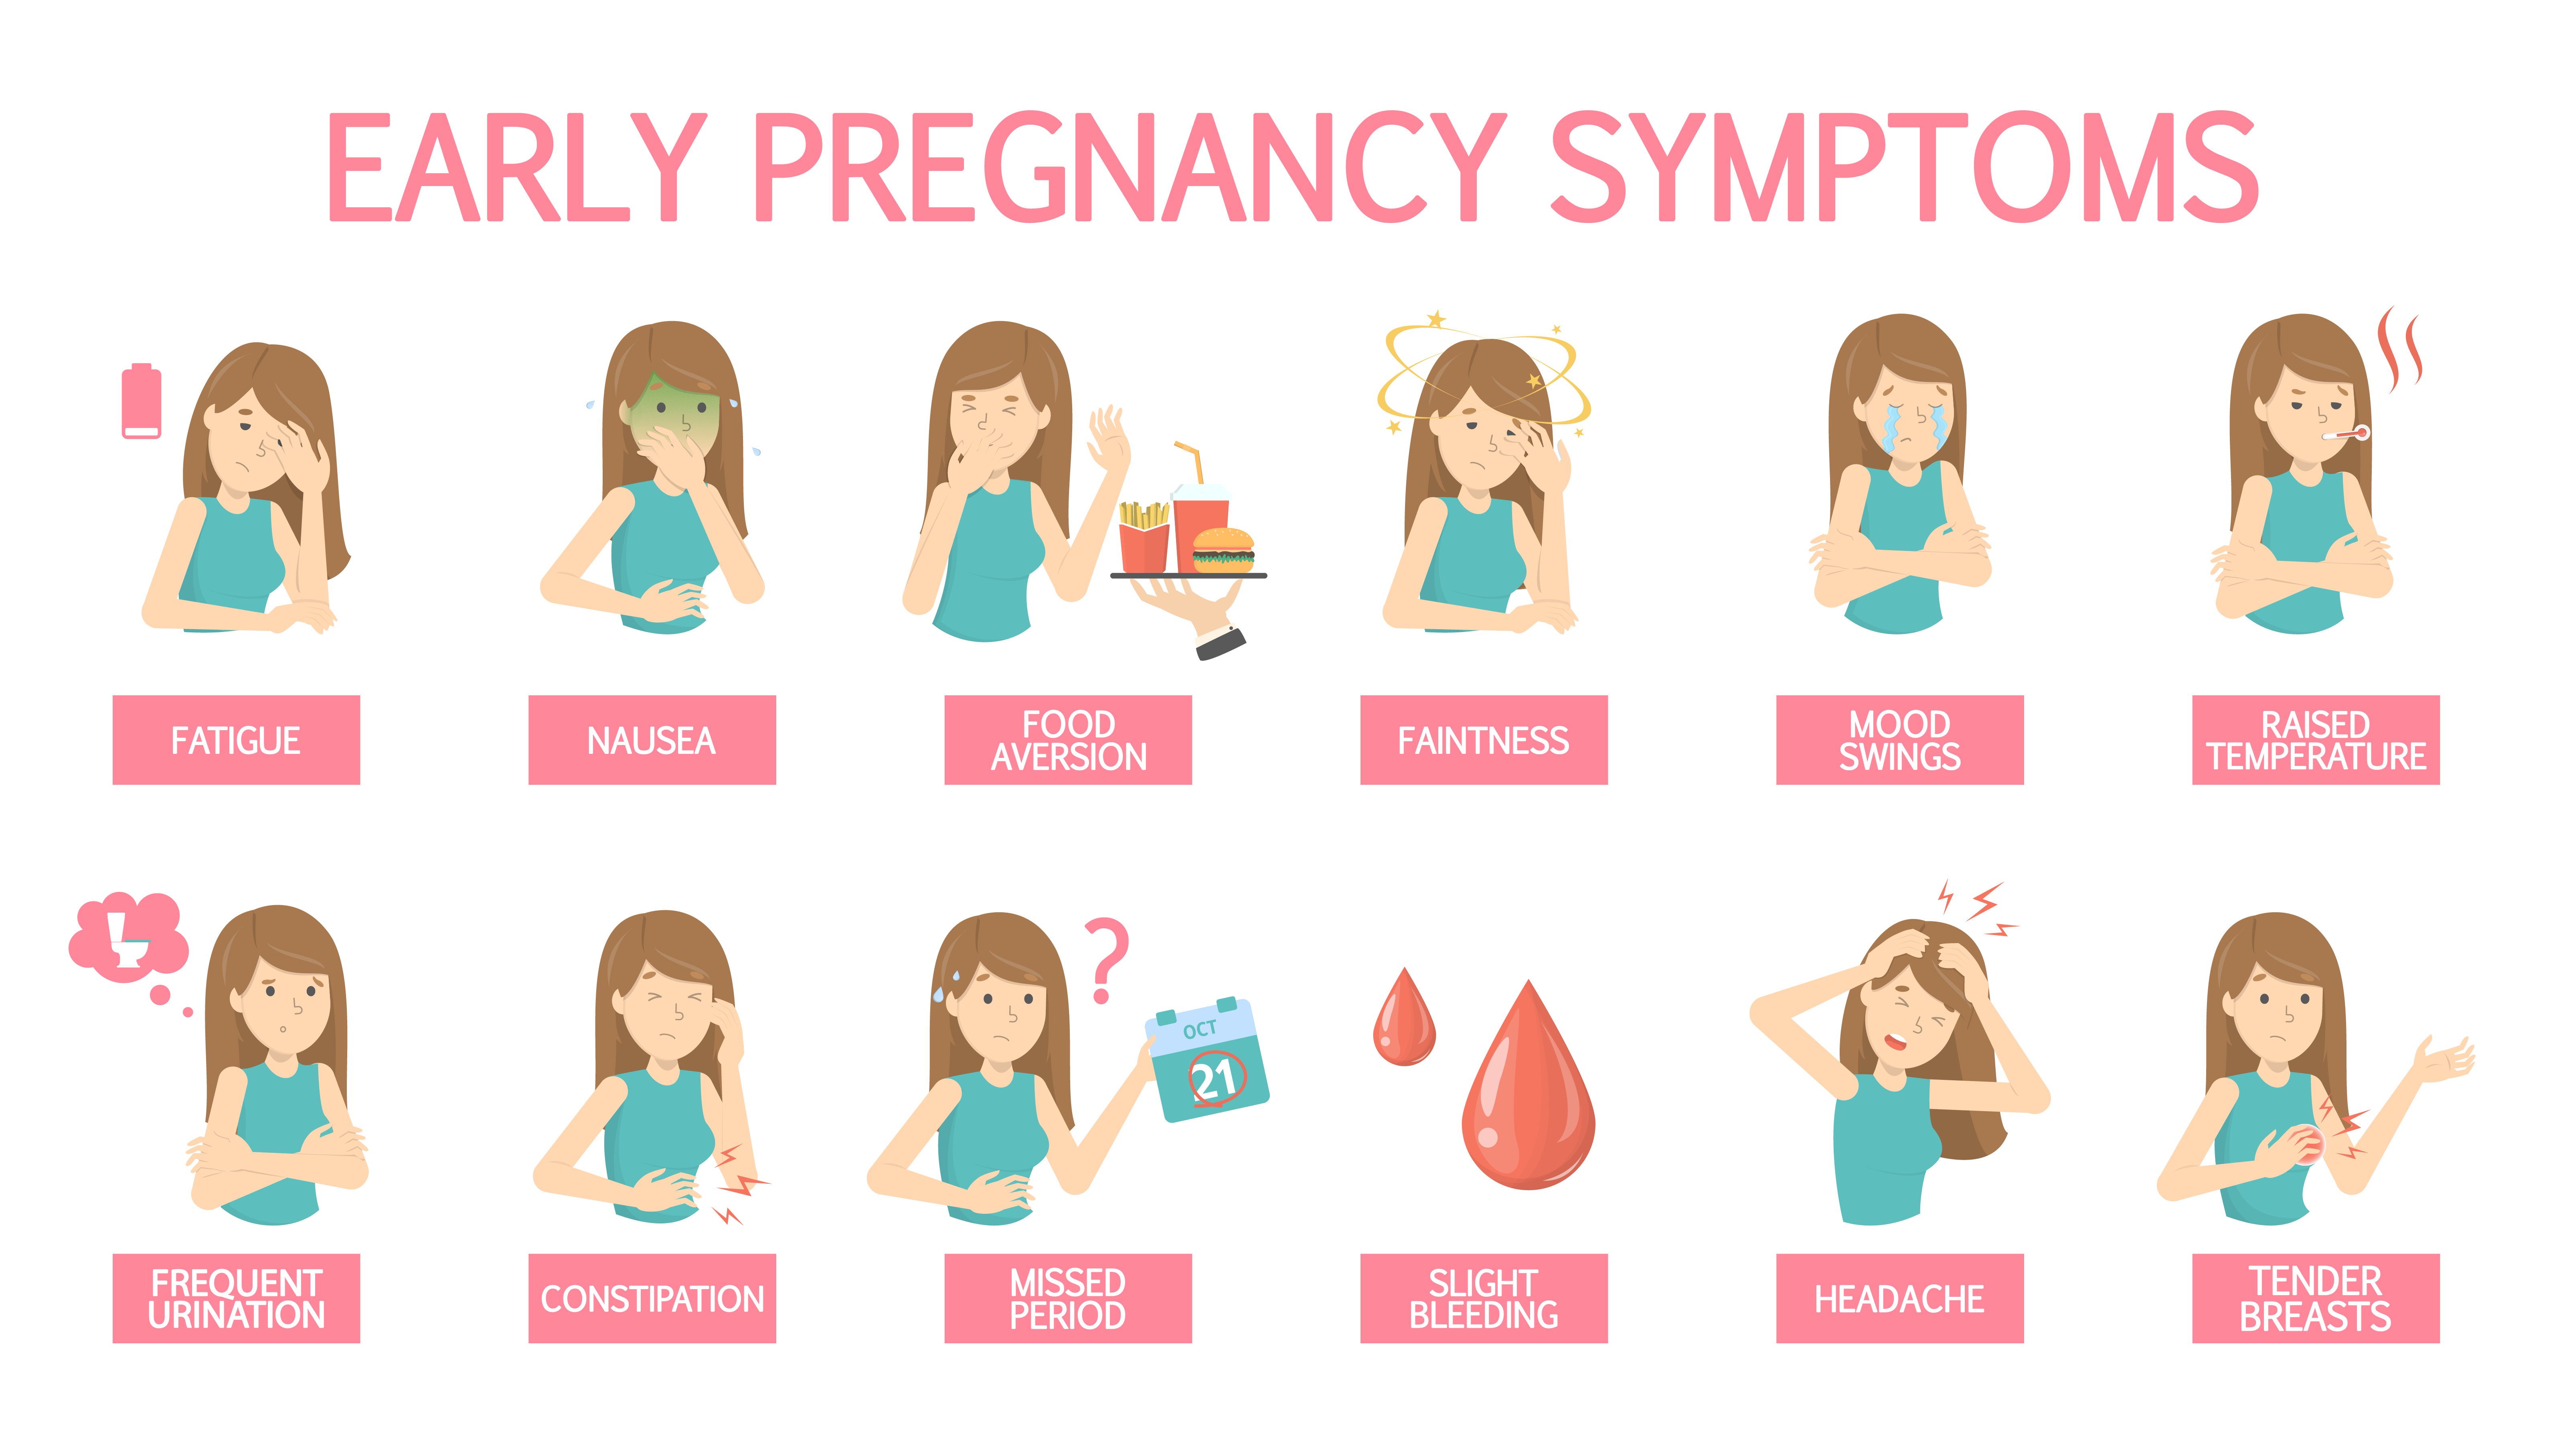 Illustration depicting early signs of pregnancy, including nausea, constipation, appetite changes, and vomiting.